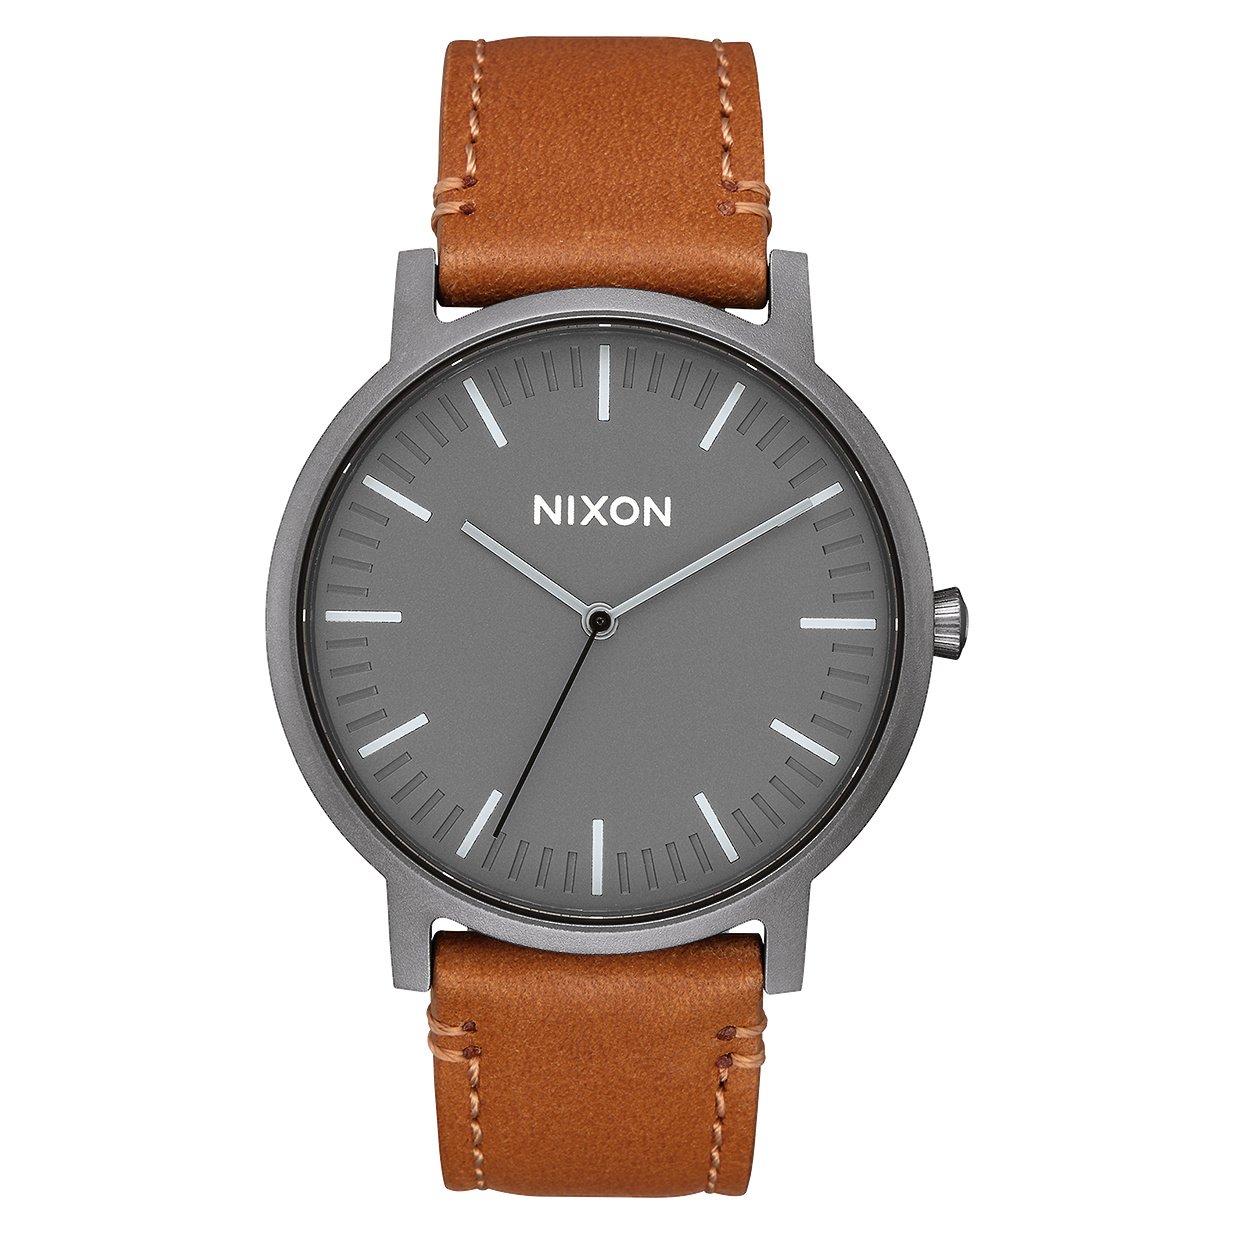 Nixon A083502 51-30 Chrono Men's Watch - Gold for Rs.10,907 for sale from a  Seller on Chrono24